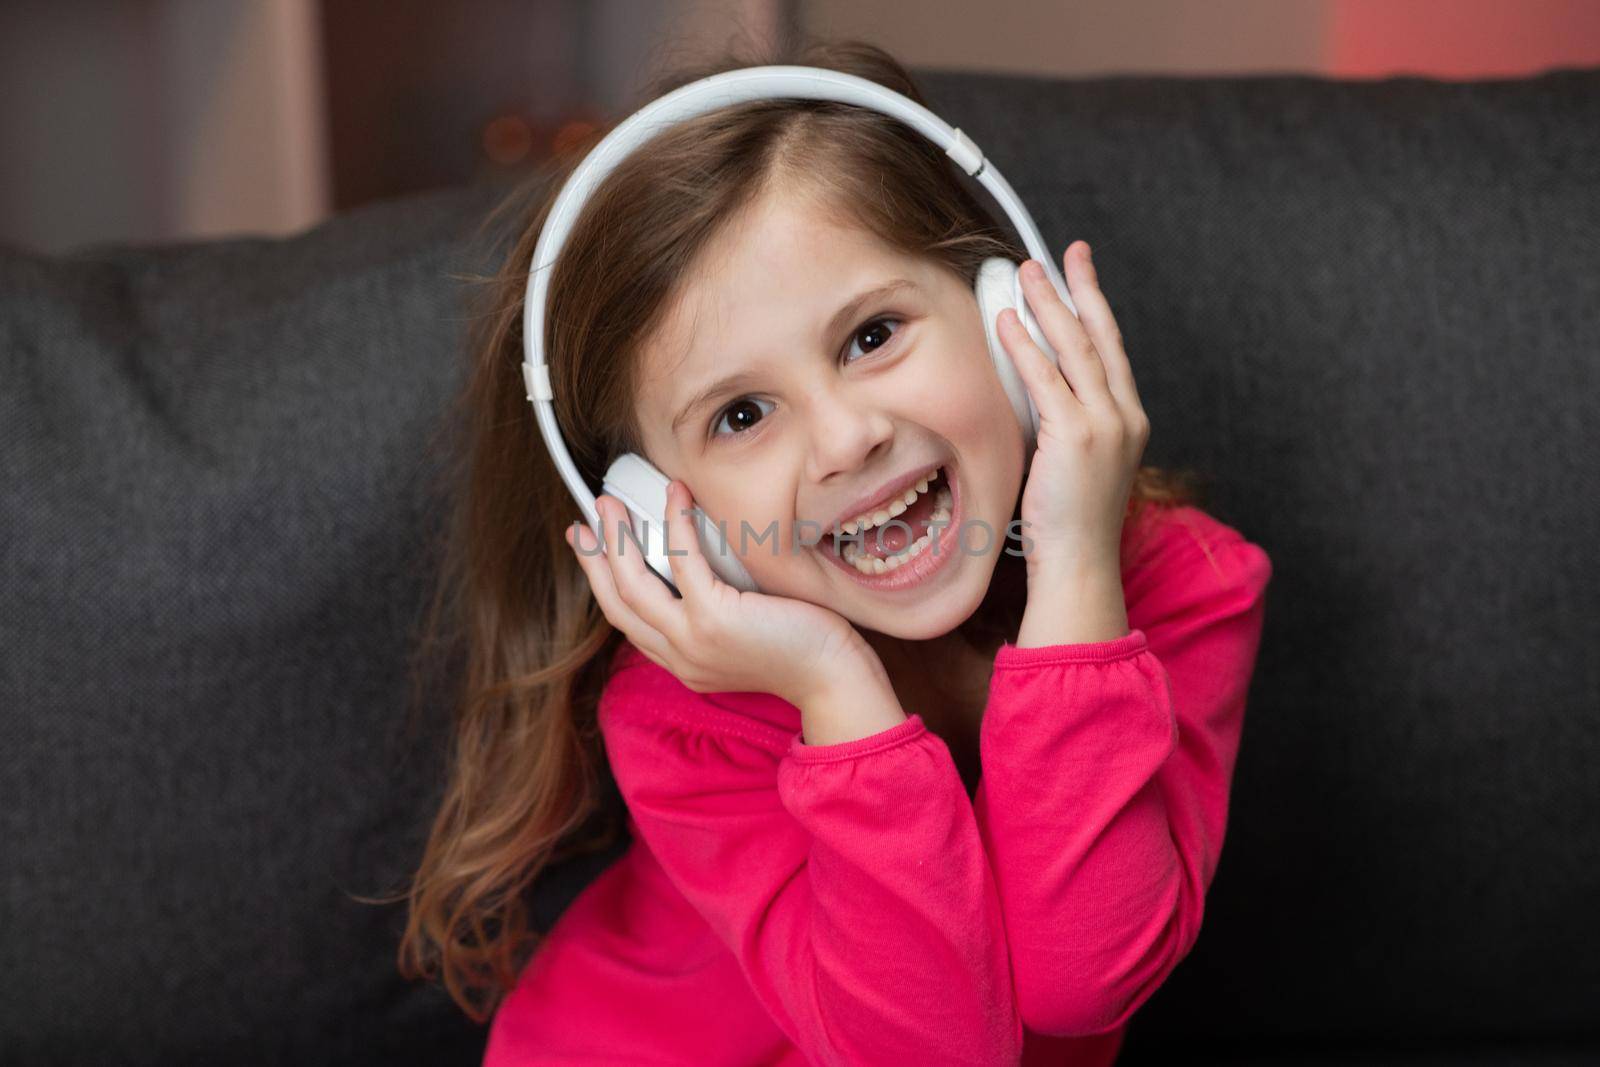 Cute Happy Little Girl Listens To Music On Wireless Headphones. Funny Little Girl Dancing, Singing And Moving To Rhythm. Kid Wearing Headphones.